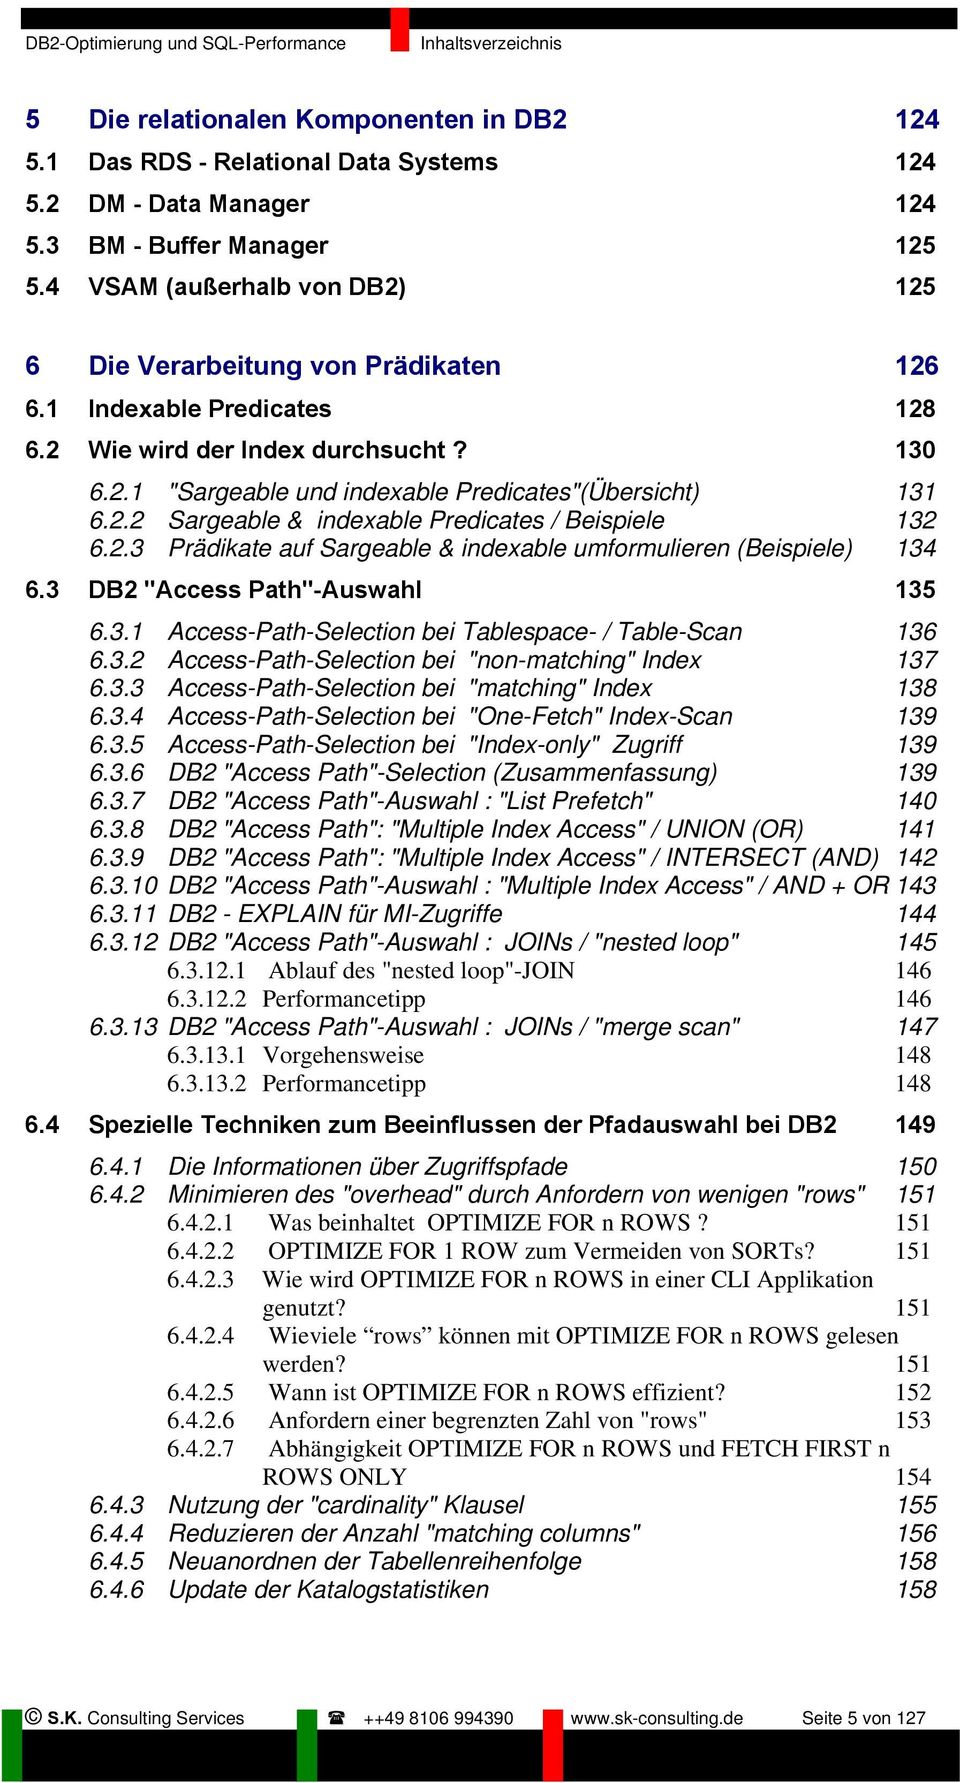 2.3 Prädikate auf Sargeable & indexable umformulieren (Beispiele) 134 6.3 DB2 "Access Path"-Auswahl 135 6.3.1 Access-Path-Selection bei Tablespace- / Table-Scan 136 6.3.2 Access-Path-Selection bei "non-matching" Index 137 6.